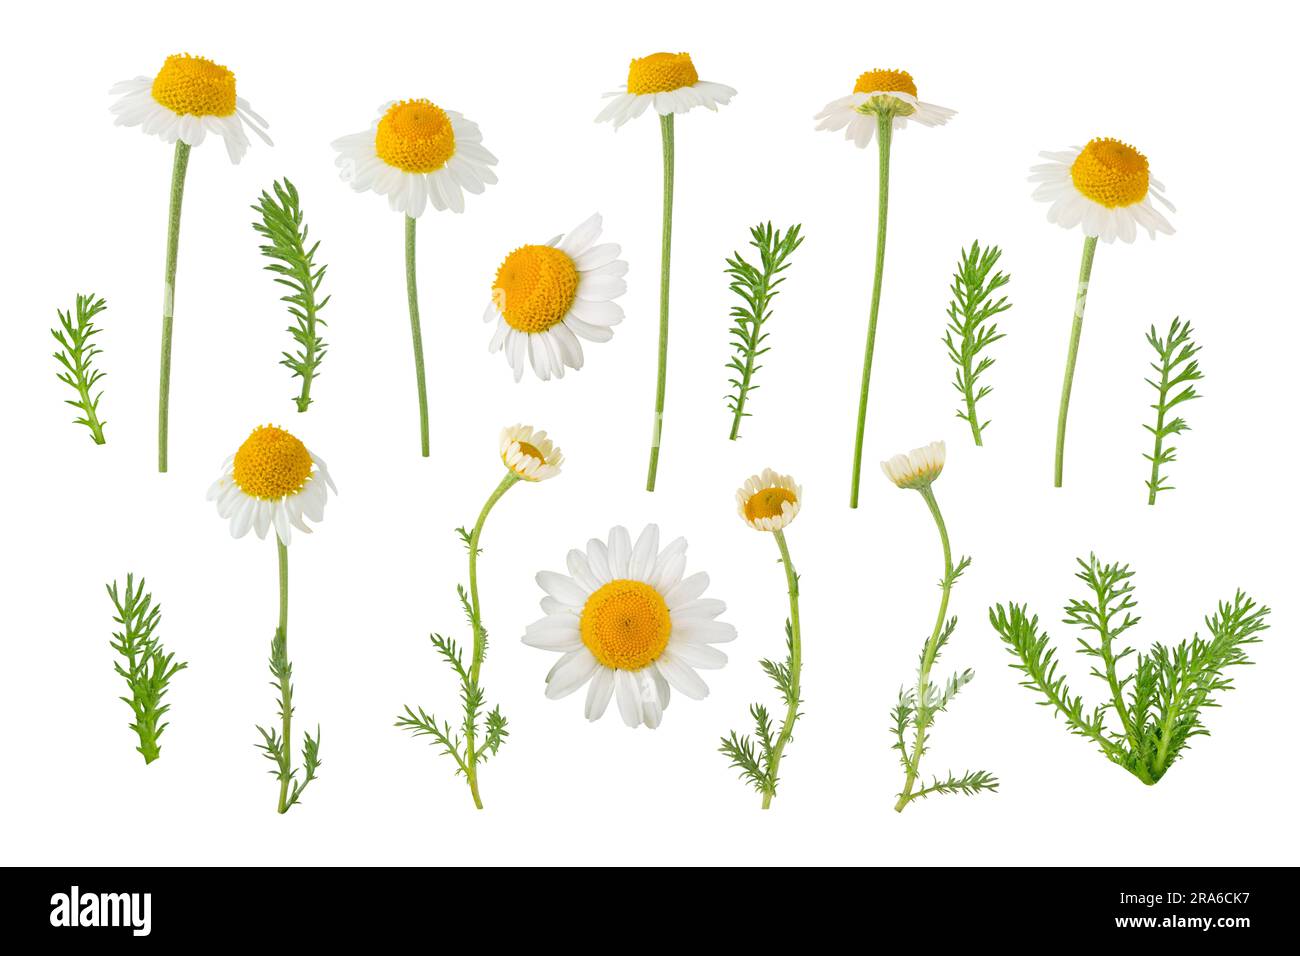 Chamomile flowers, buds and leaves set isolated on white. White daisy in bloom. Chamaemelum nobile herbal medicine plant. Stock Photo